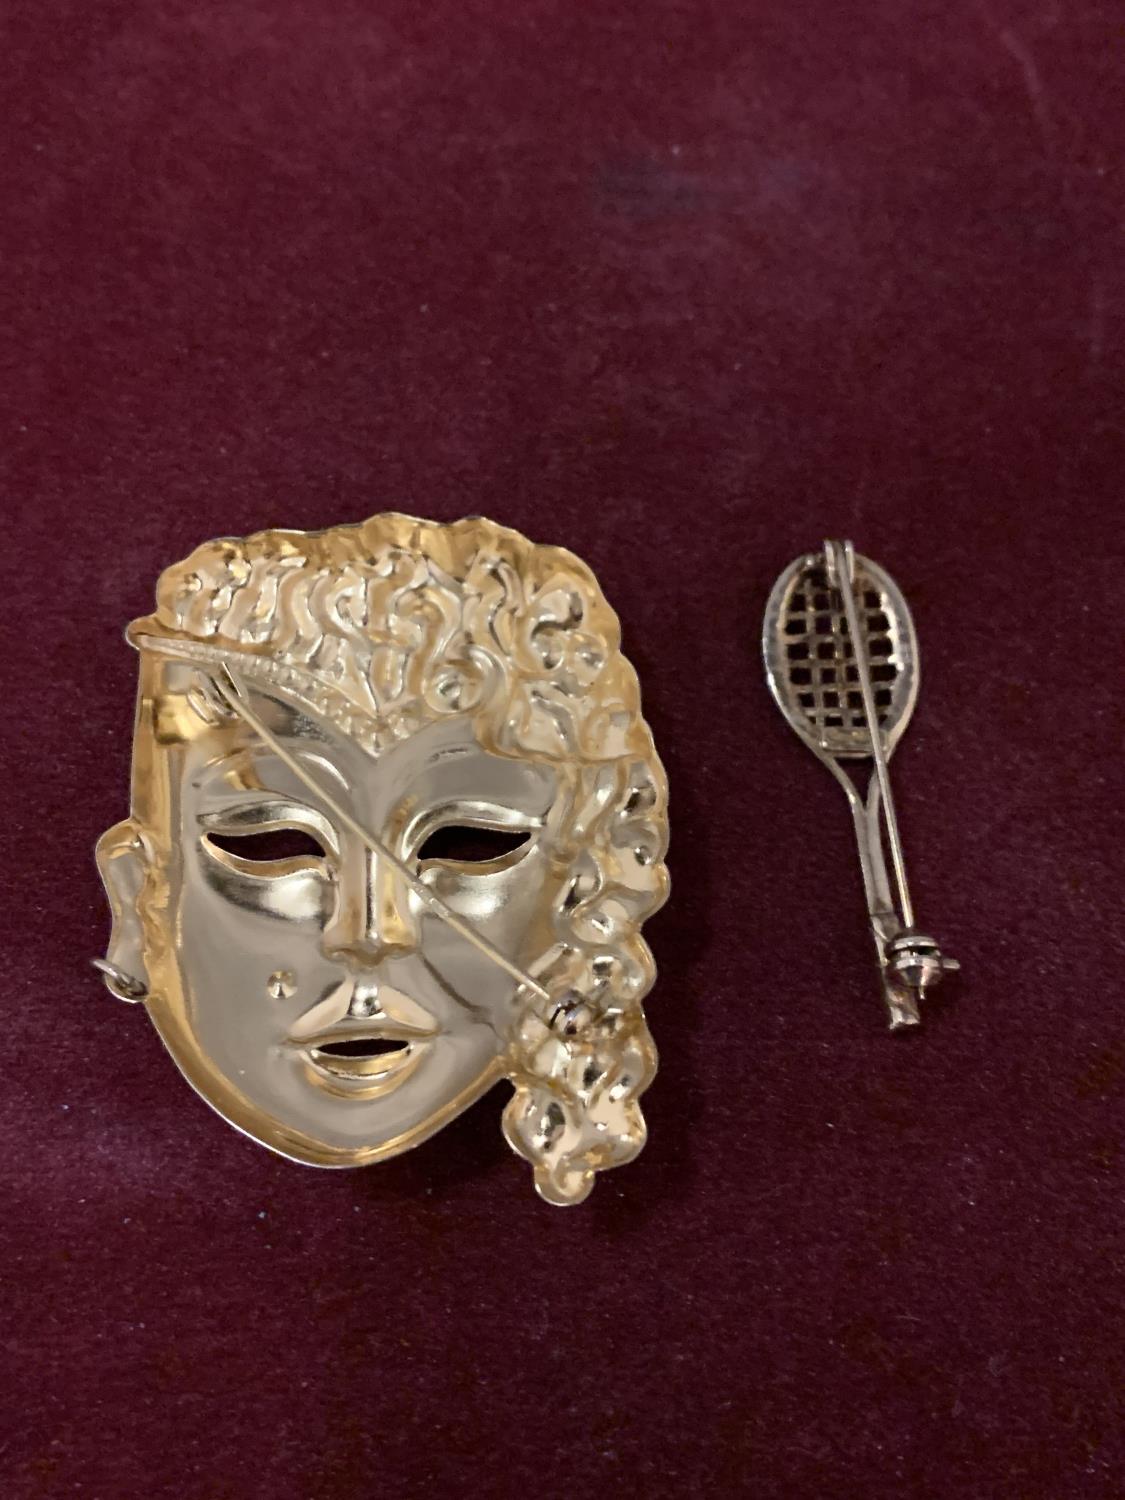 TWO SILVER GILT BROOCHES, ONE A TENNIS RACKET, THE OTHER A MASK - Image 4 of 4